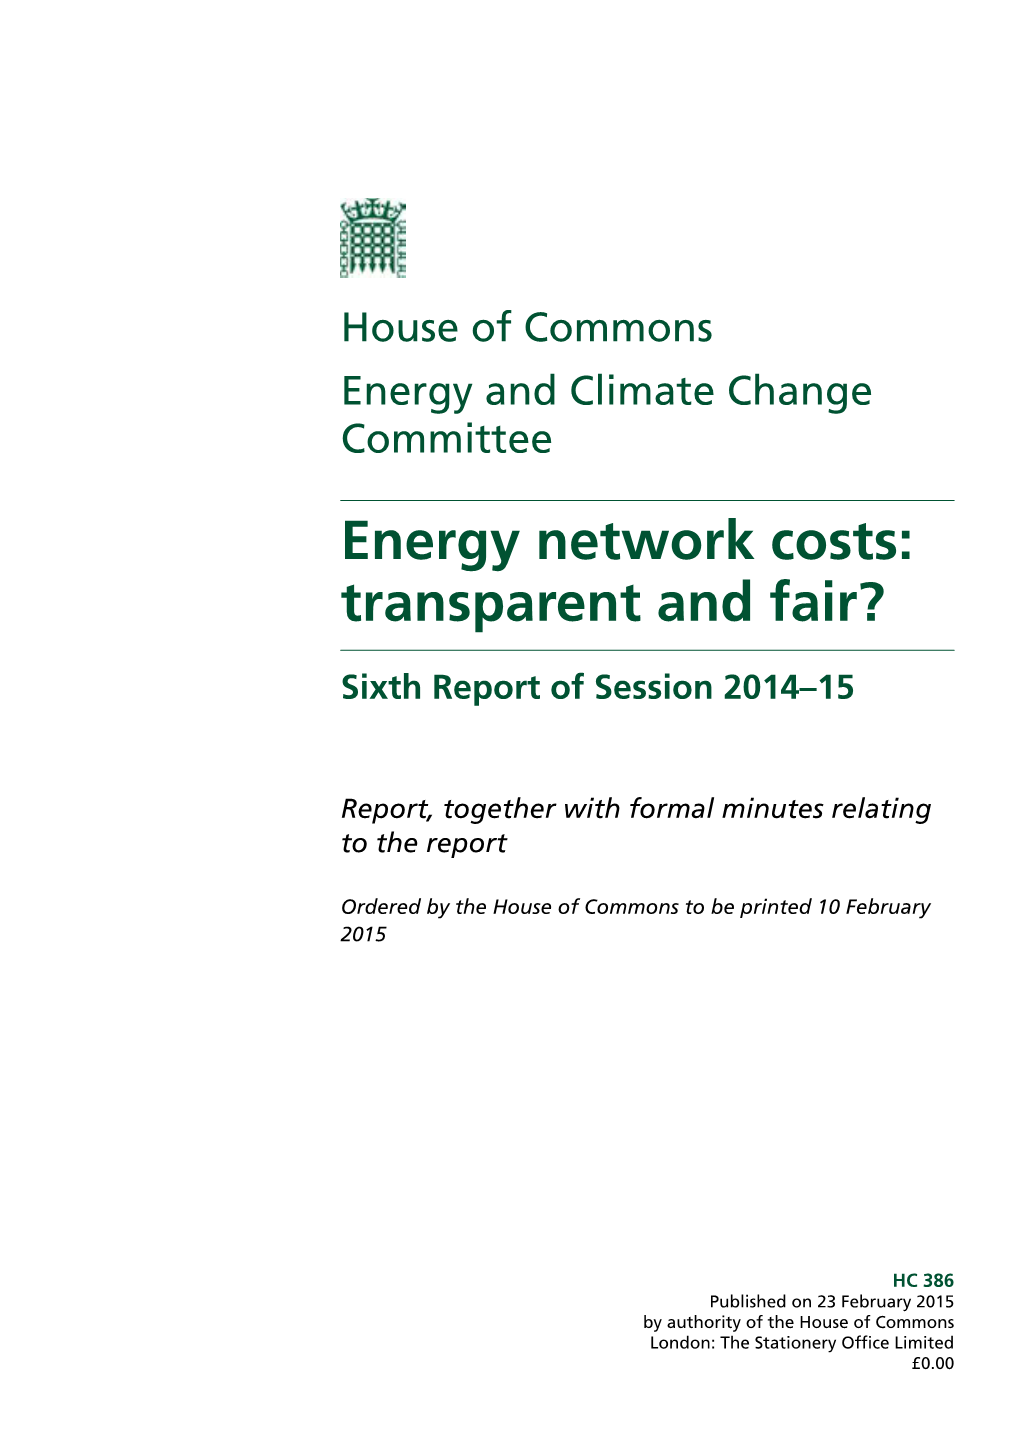 Energy Network Costs: Transparent and Fair?